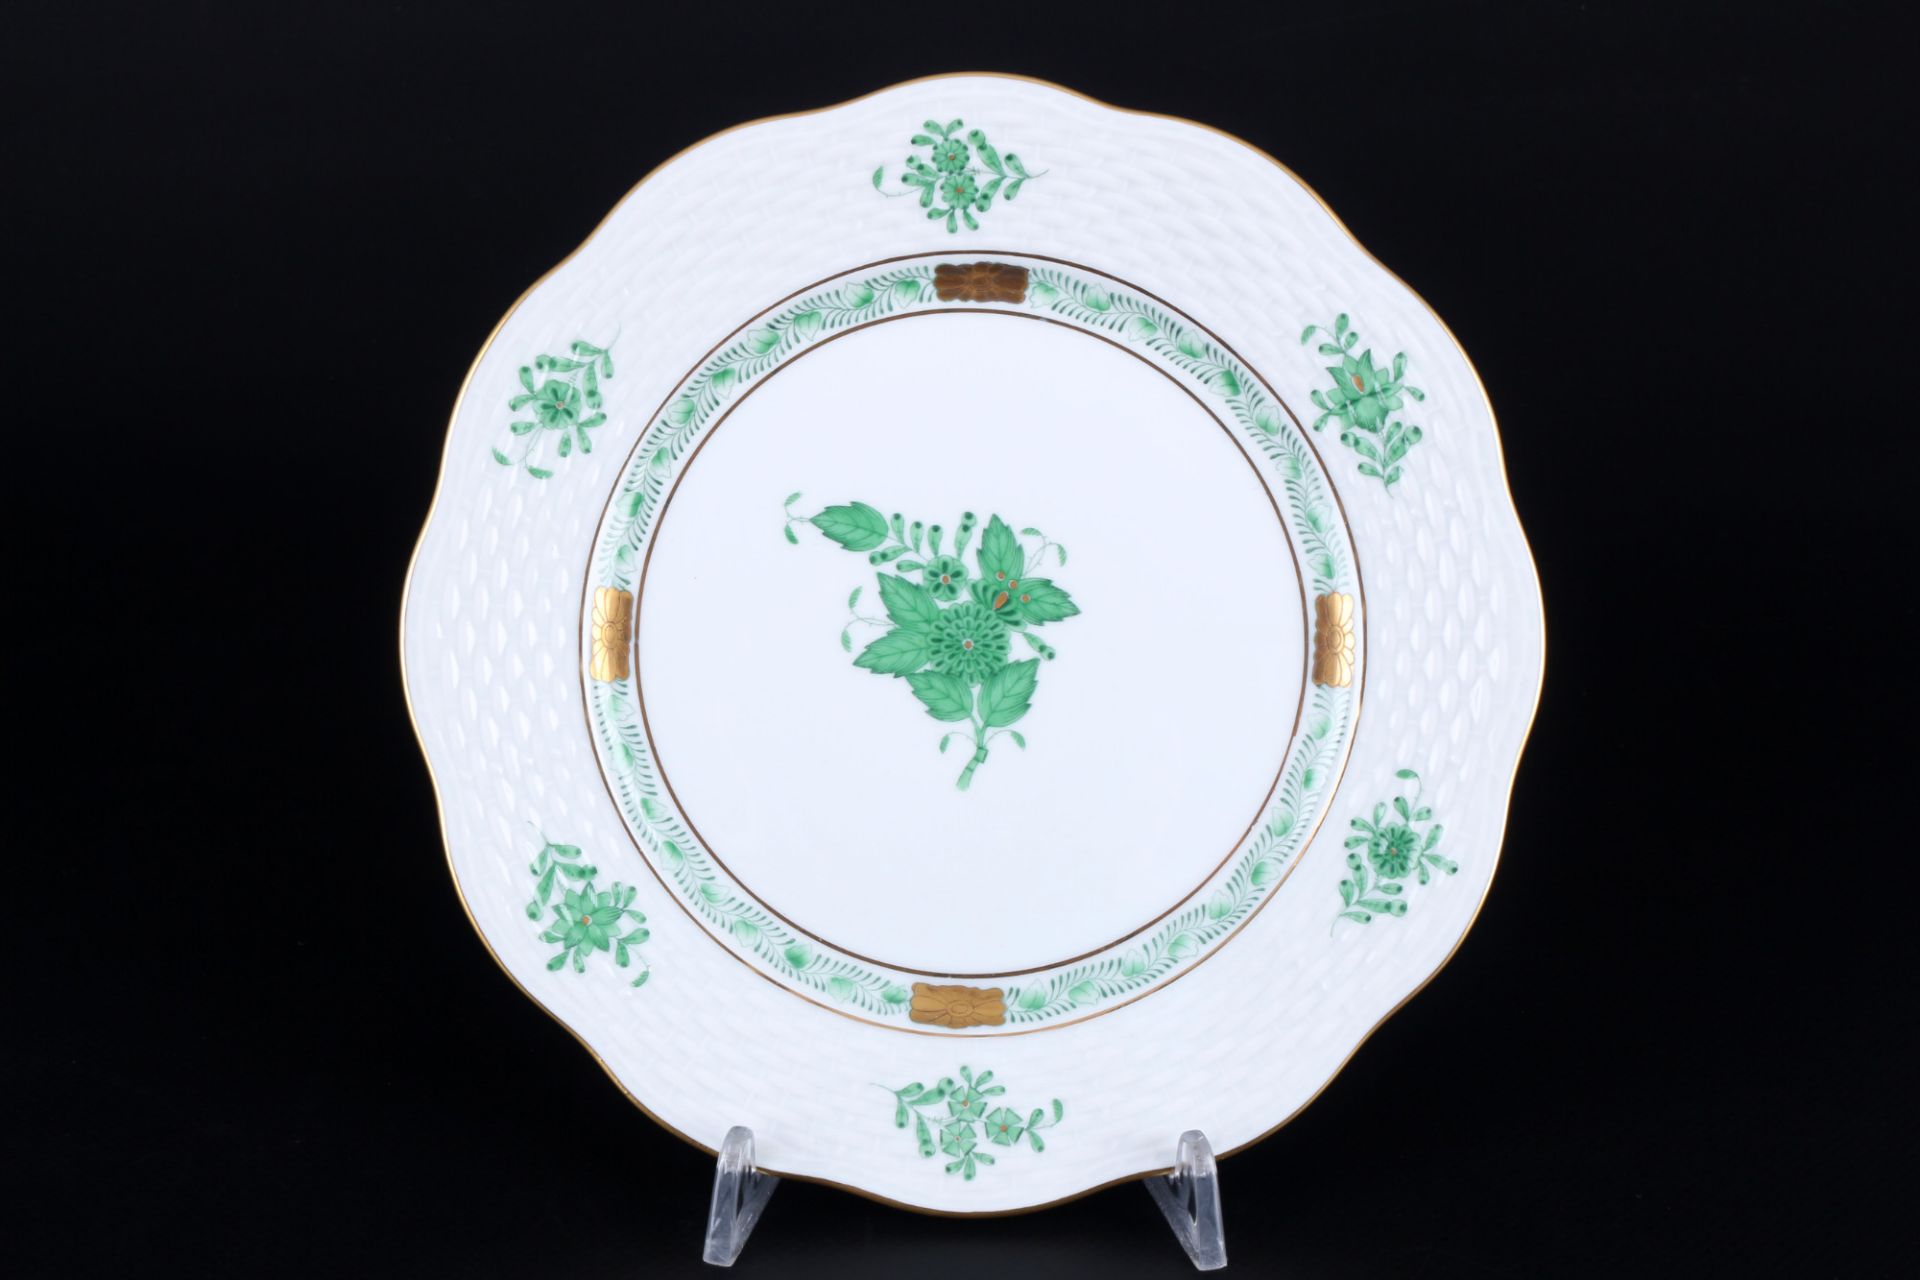 Herend Apponyi Vert 8 tea cups with saucers and plates, Teegedecke, - Image 5 of 6